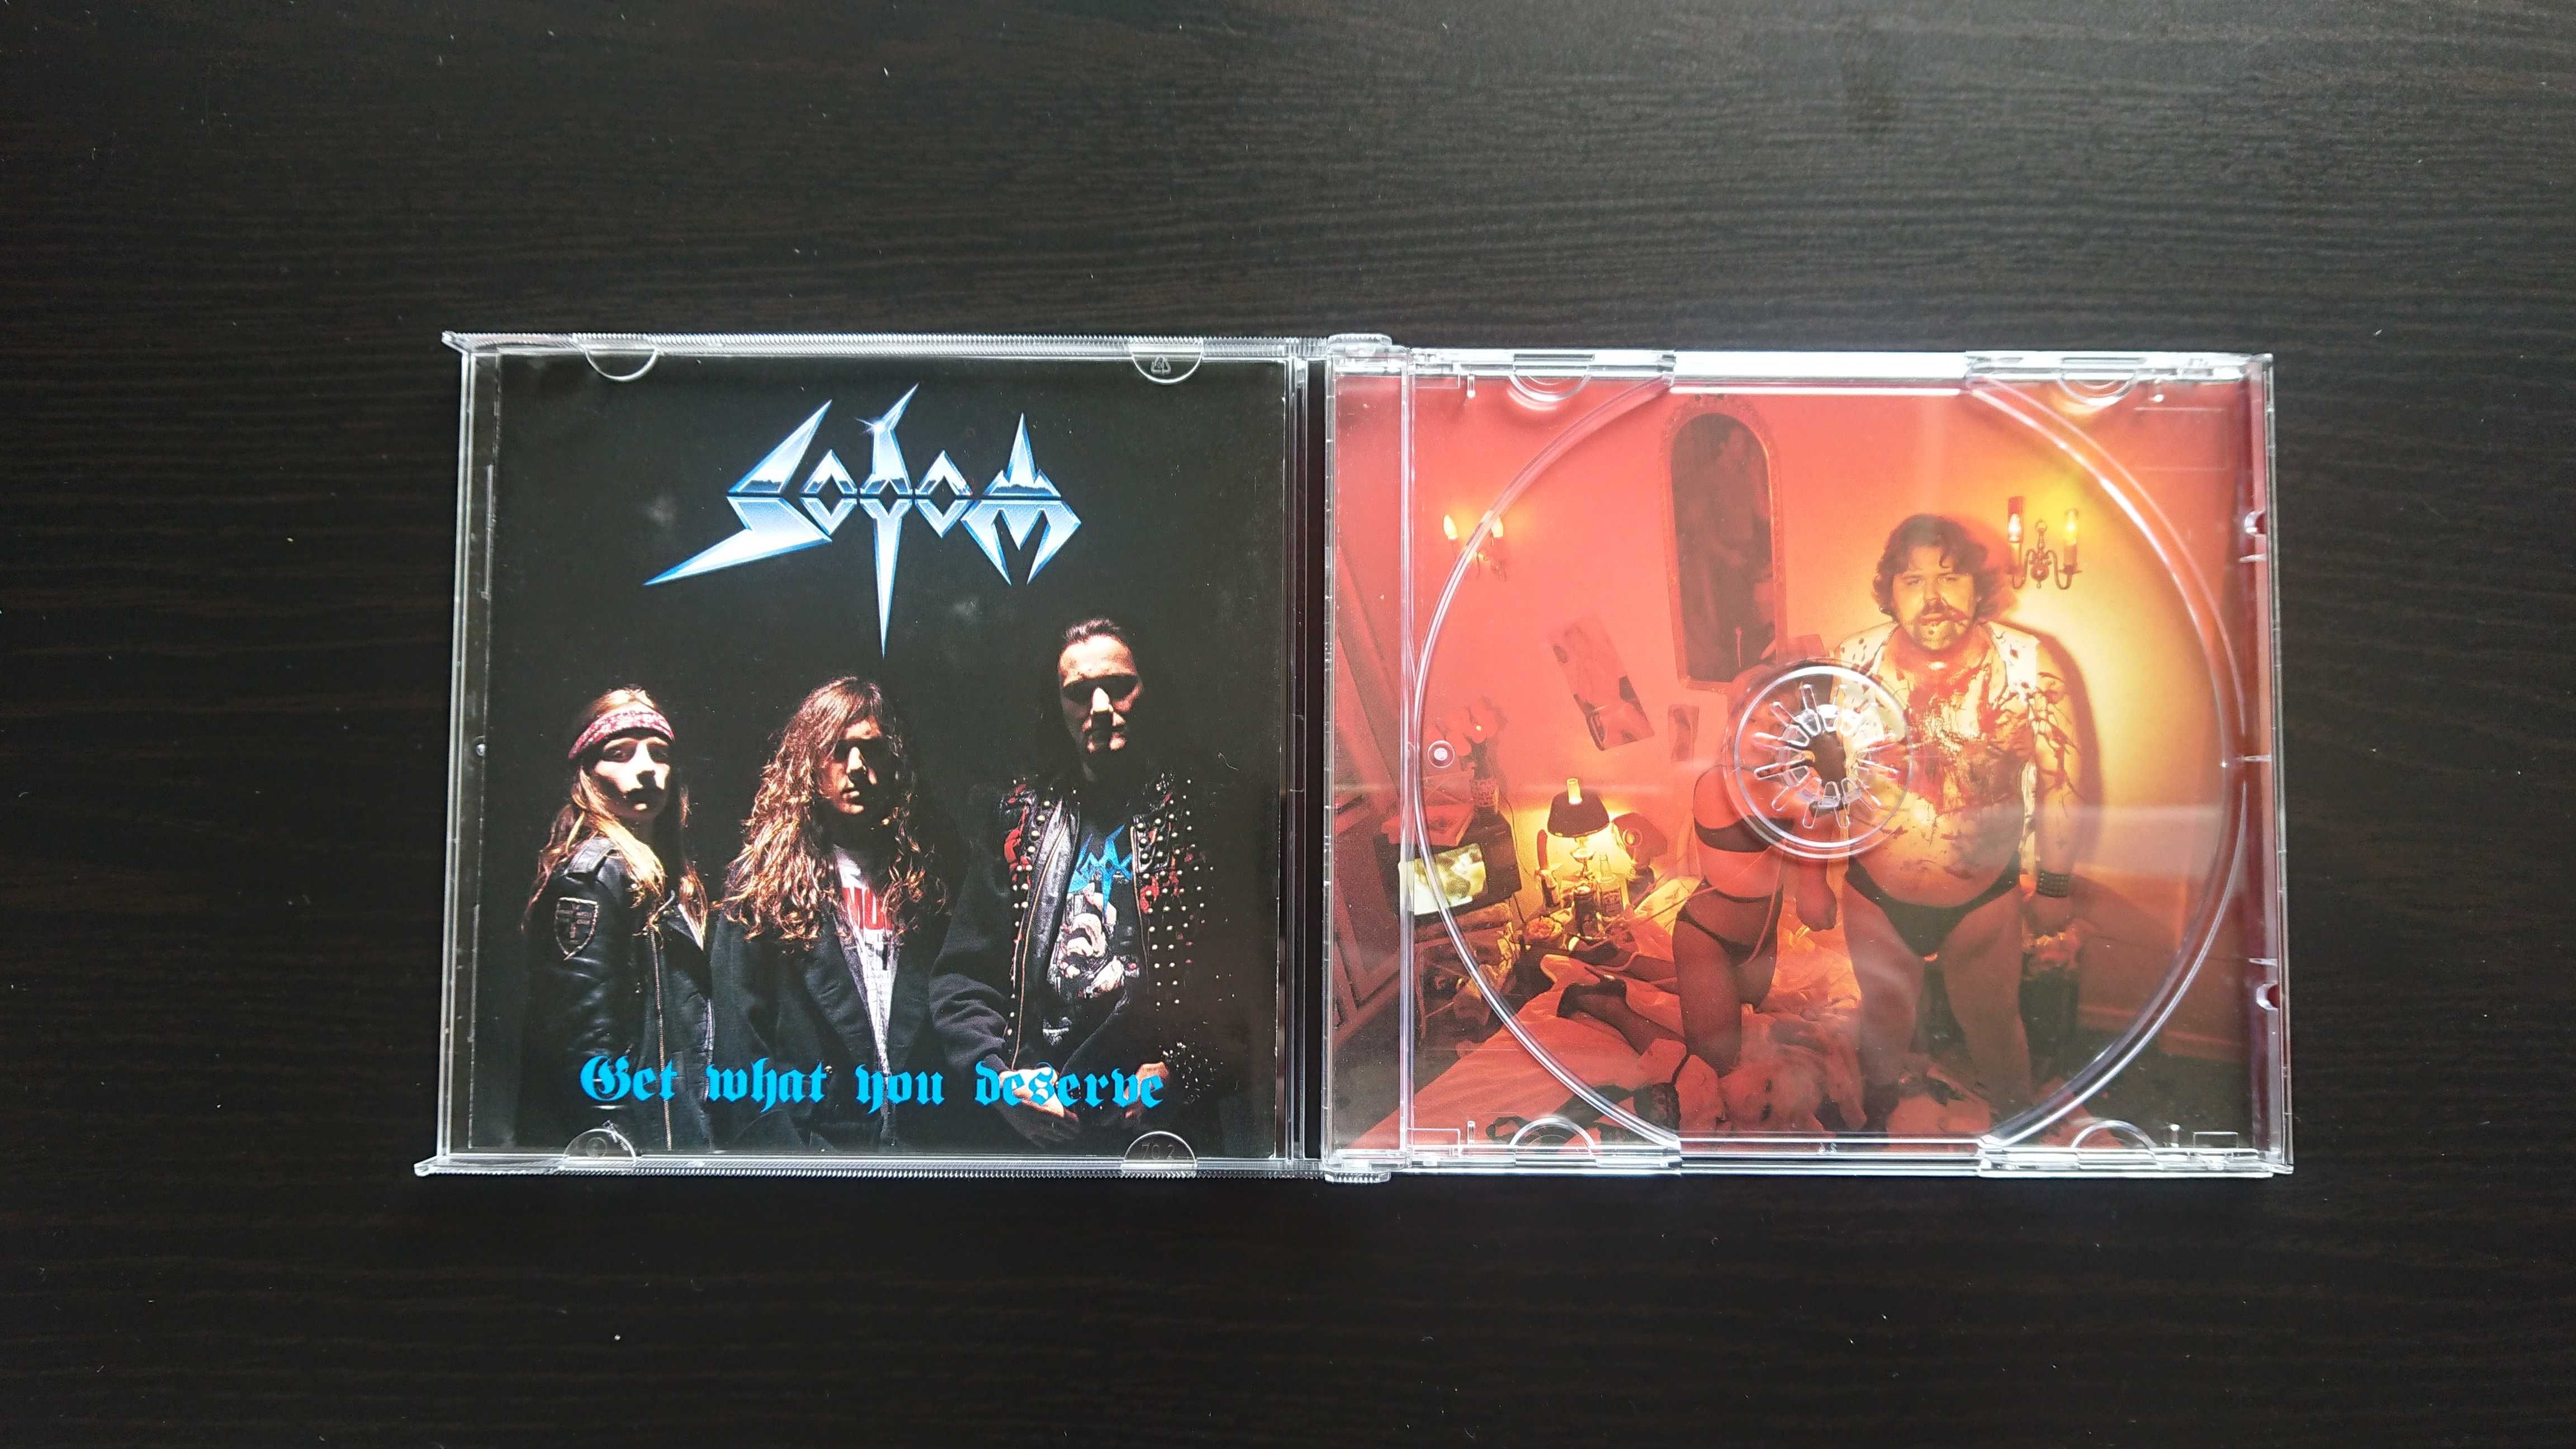 Sodom Get What You Deserve CD *IDEALNY STAN* SPV One-Sided Inlay Card